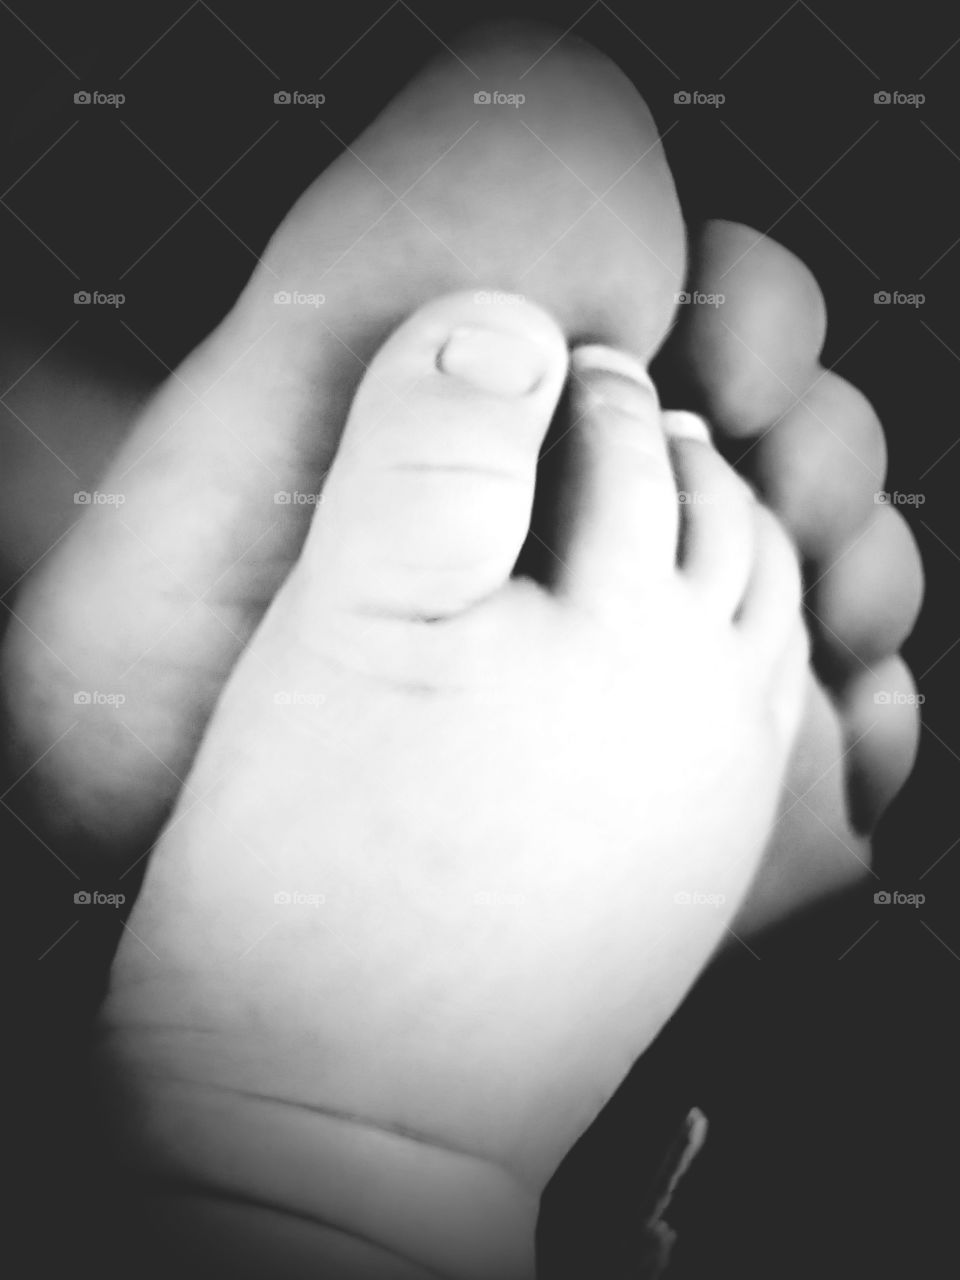 mommy's foot baby's foot